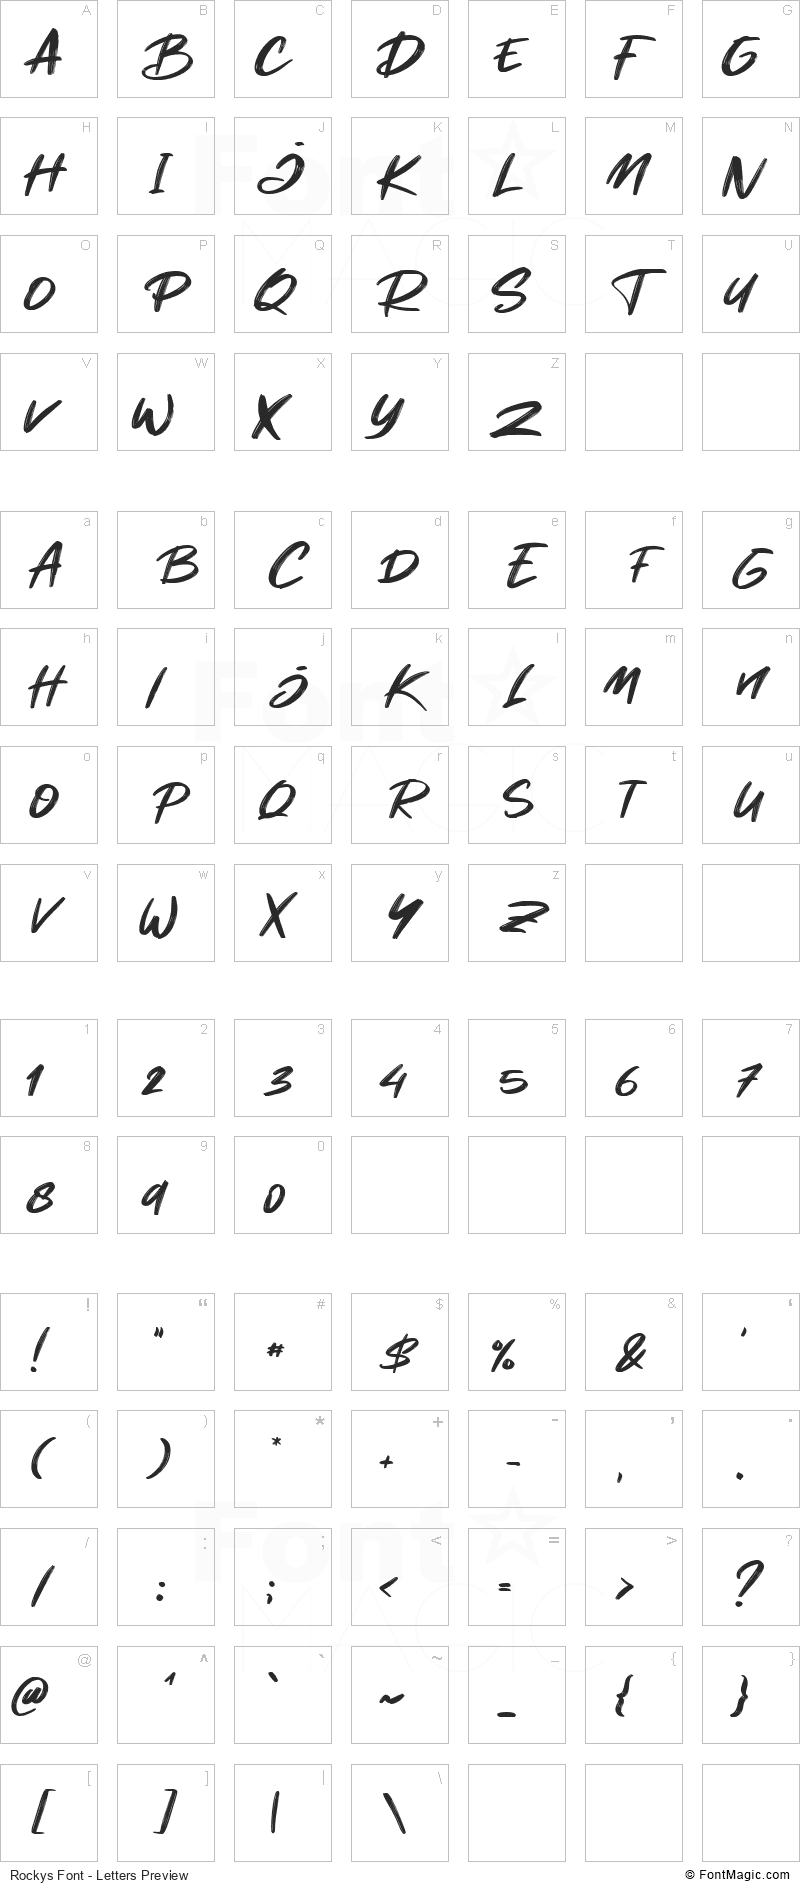 Rockys Font - All Latters Preview Chart